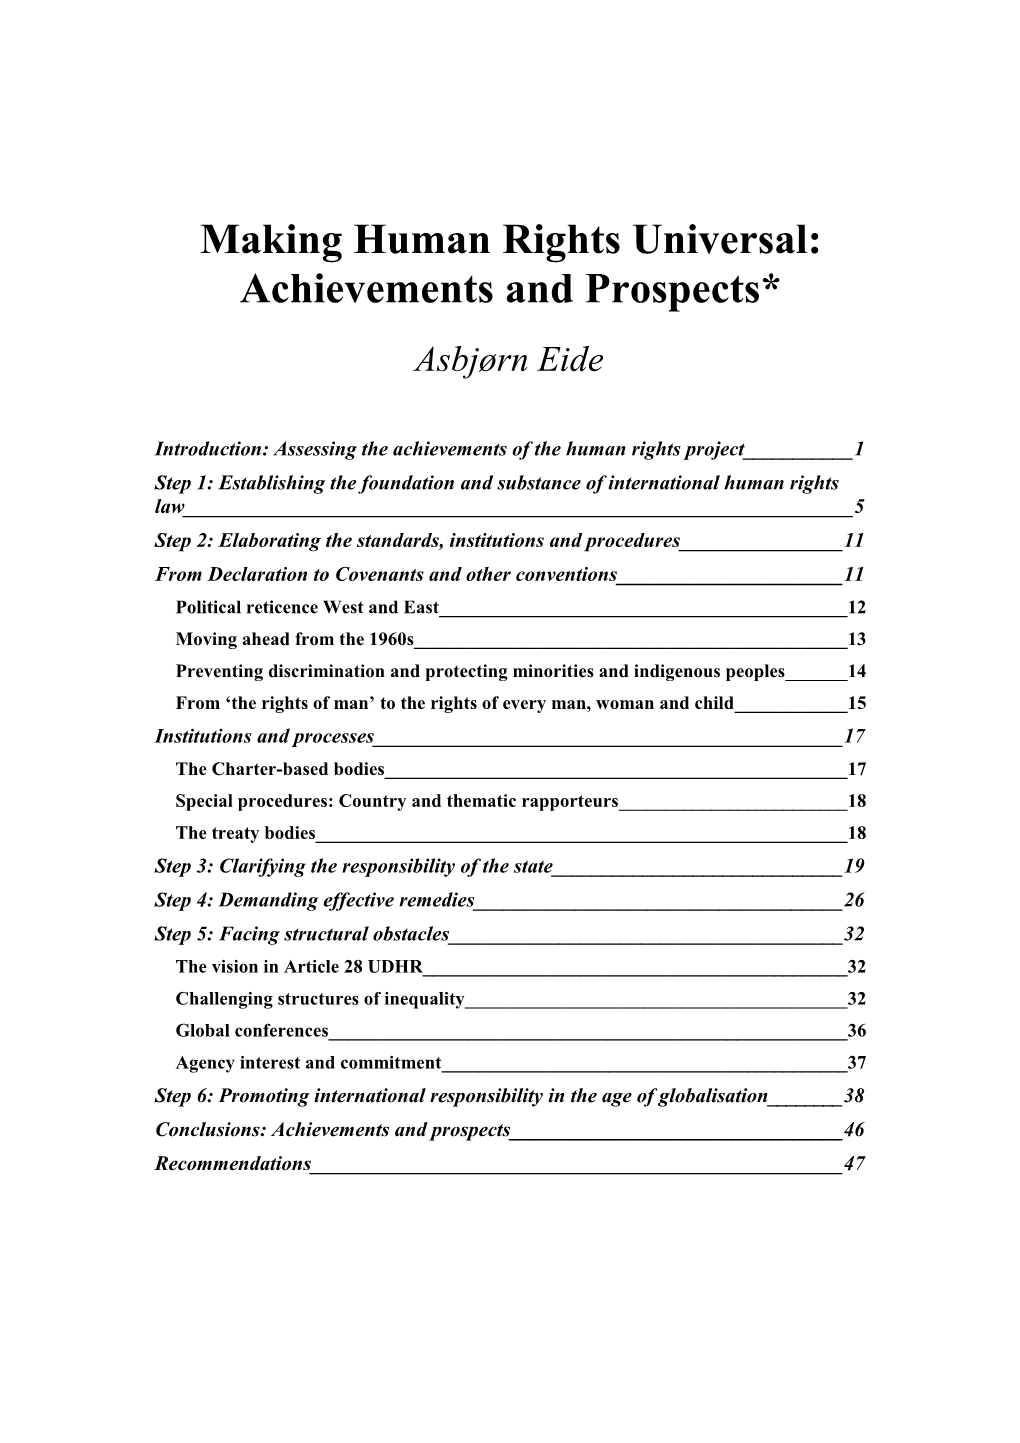 Human Rights at the United Nations: Achievements and Prospects